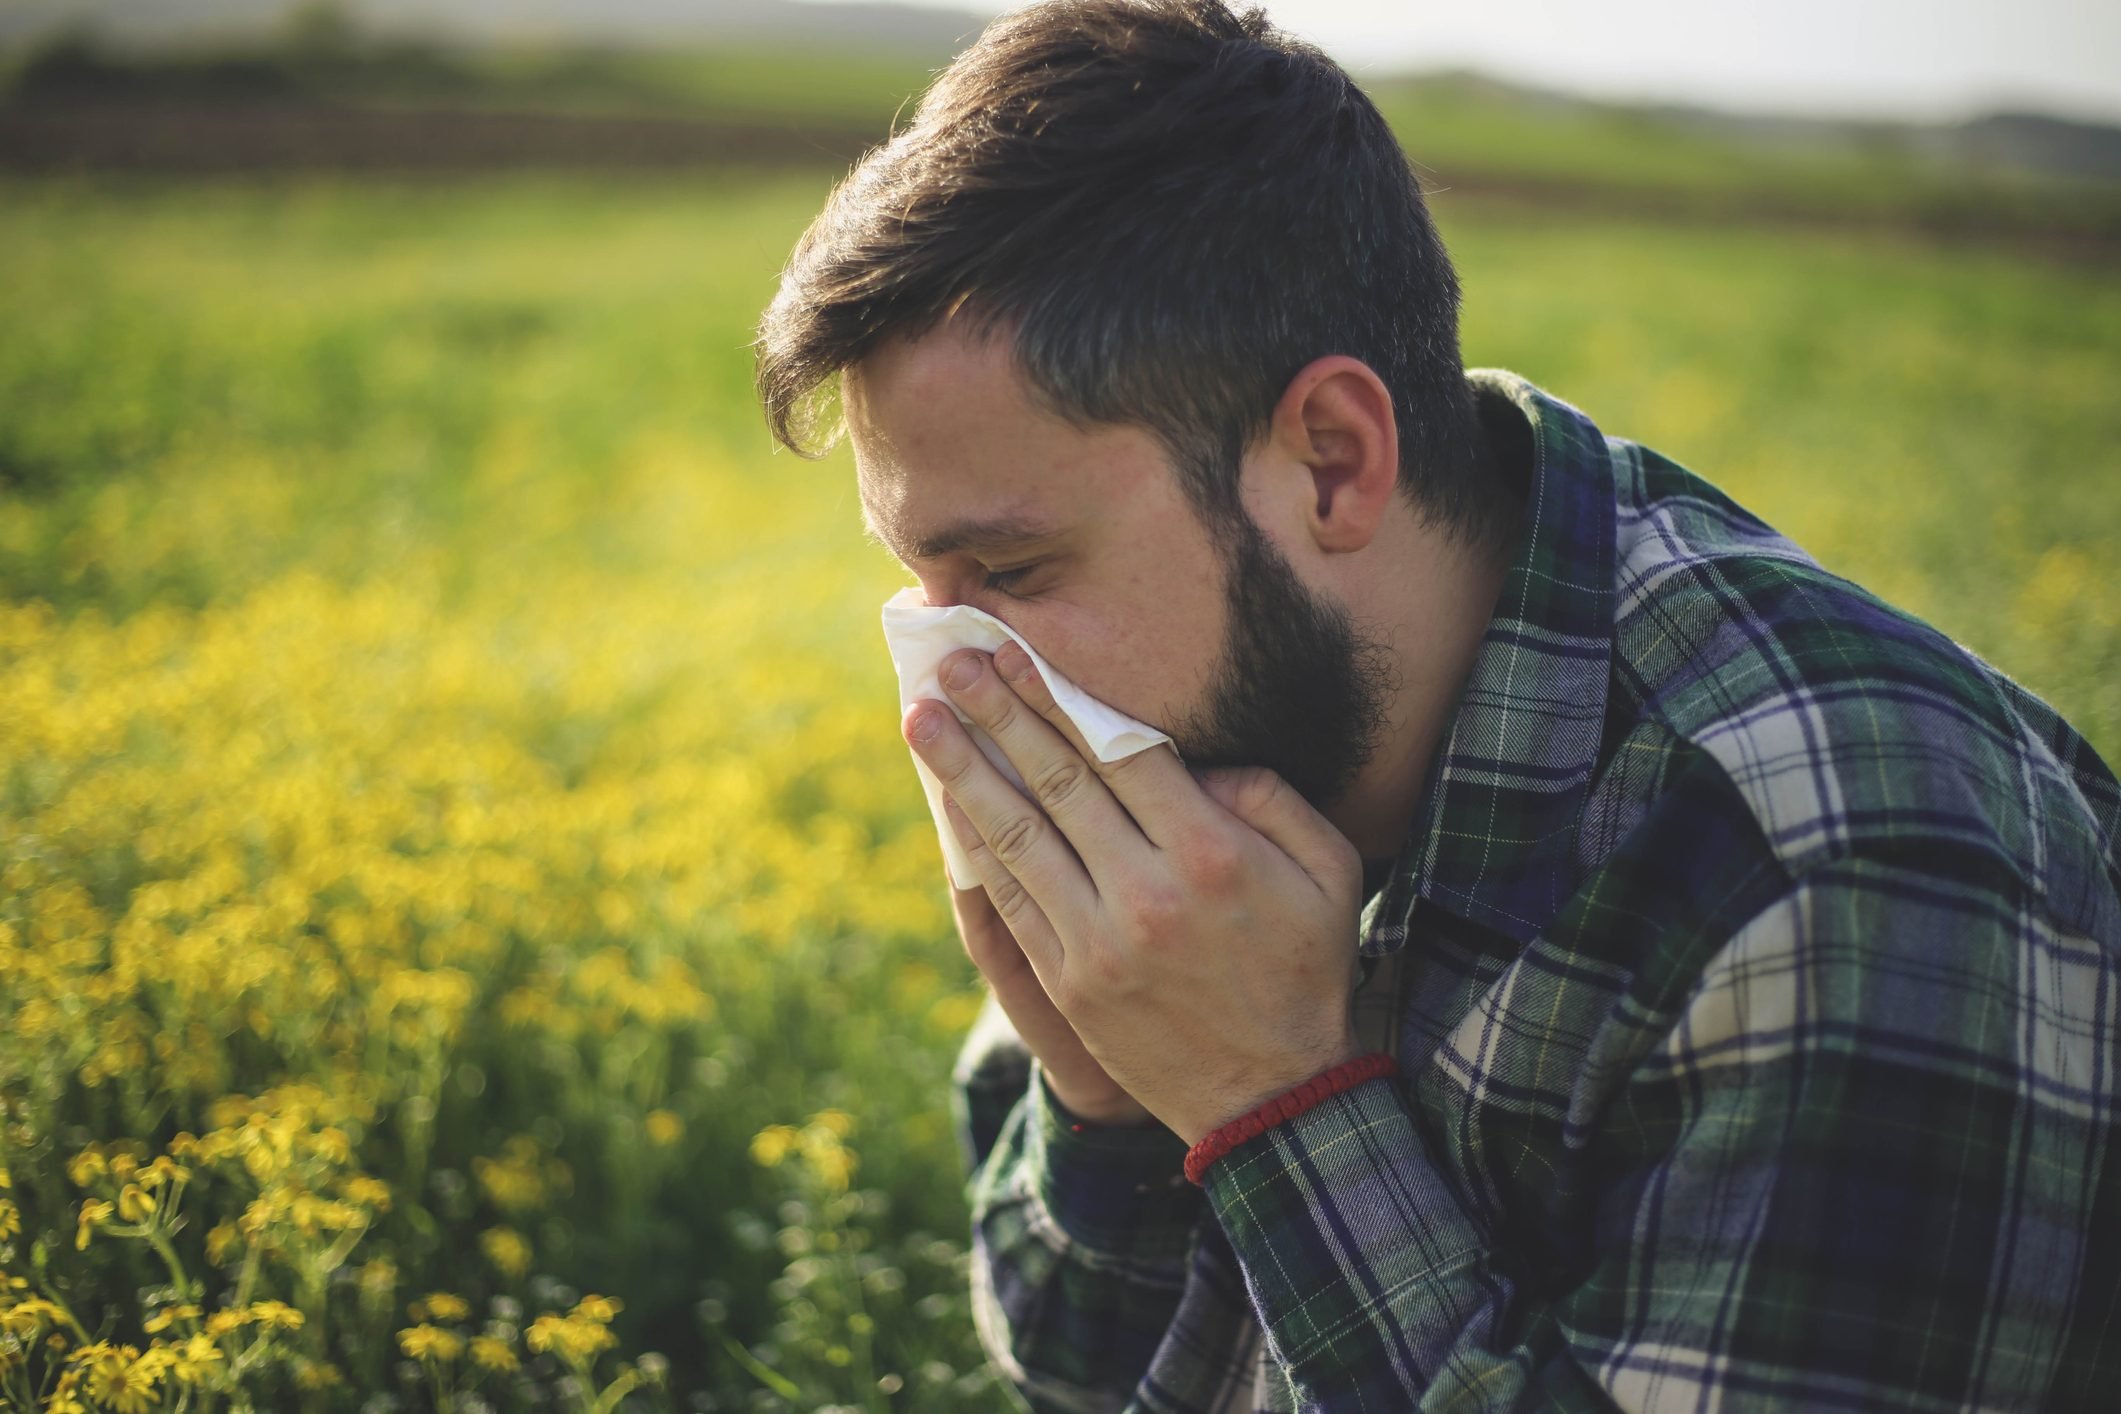 9 Foods That May Help Ease Your Allergies